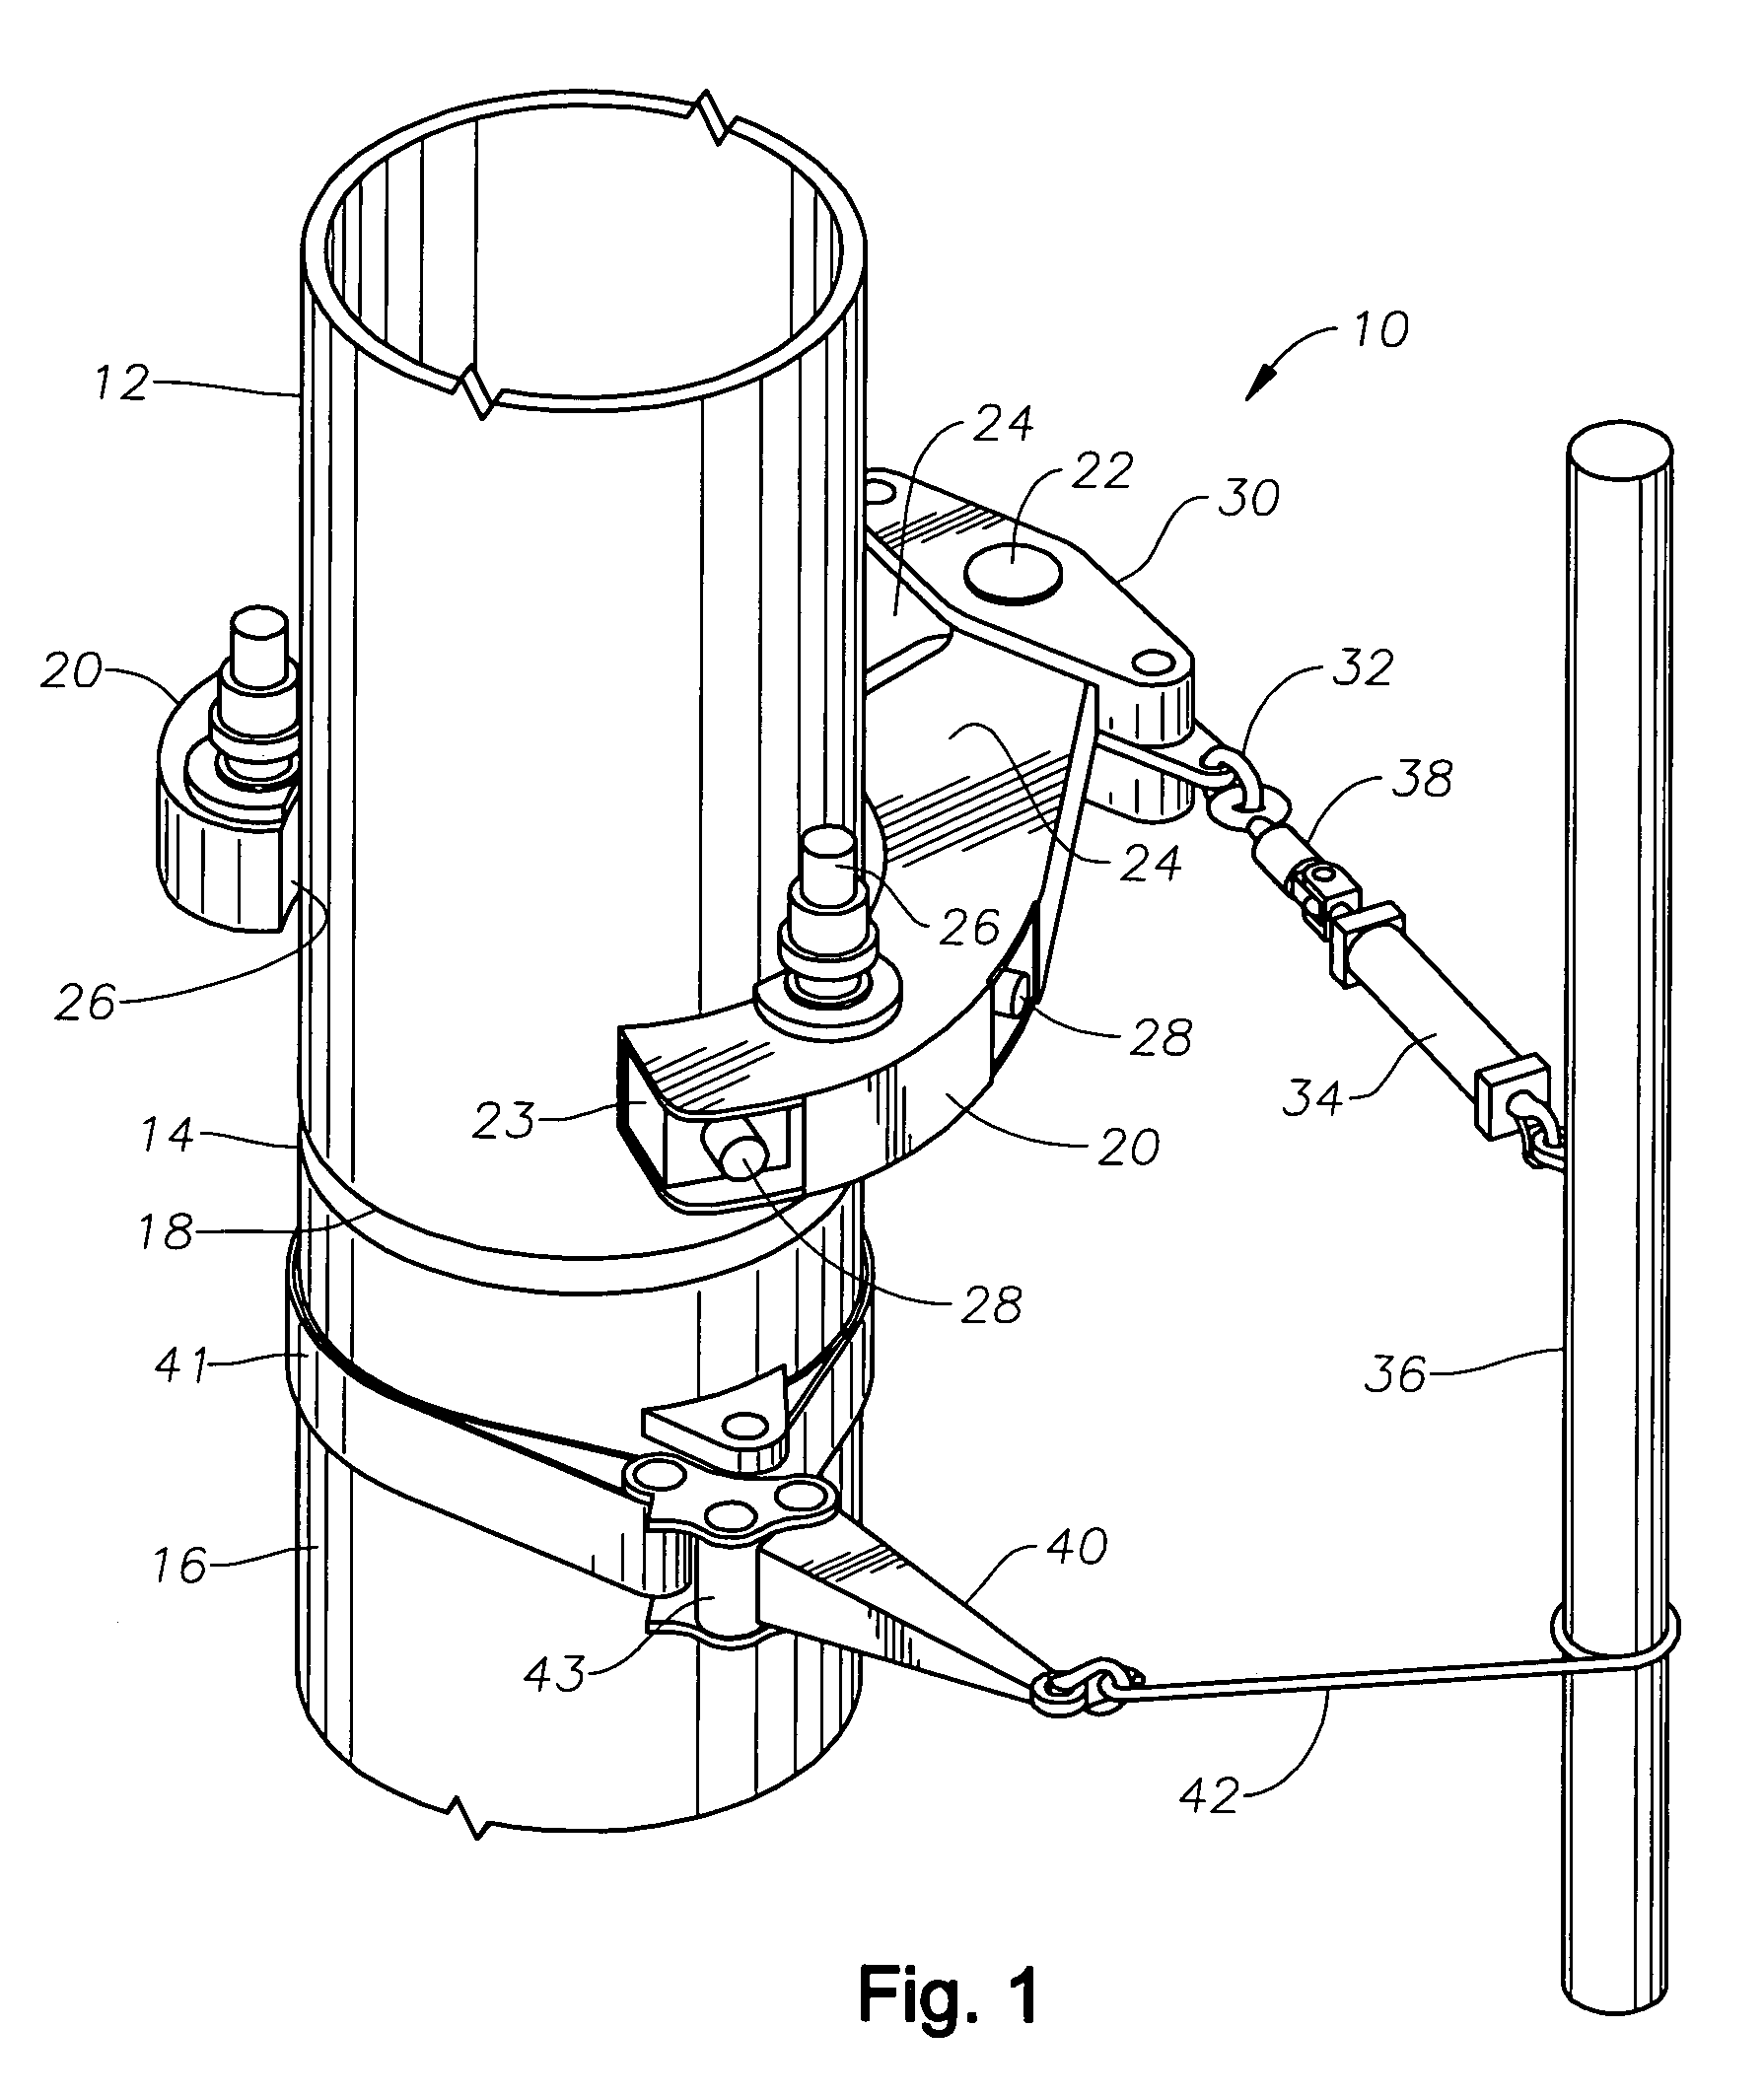 Method and apparatus for connecting and disconnecting threaded tubulars